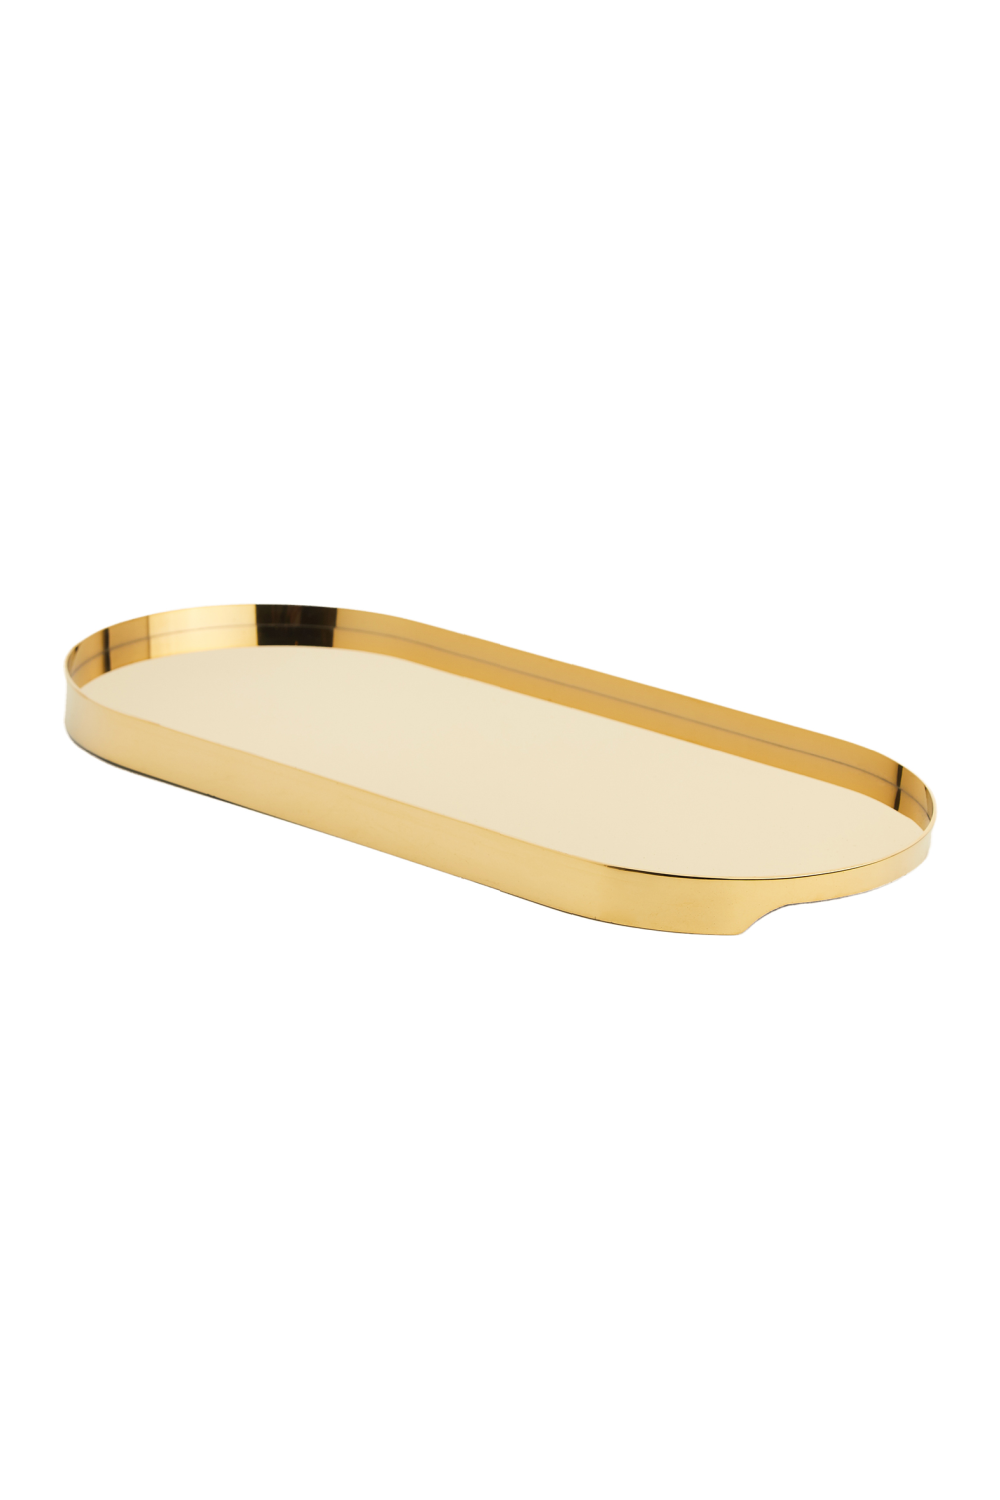 Polished Brass Oval Tray | Liang & Eimil Galleria | OROA.com